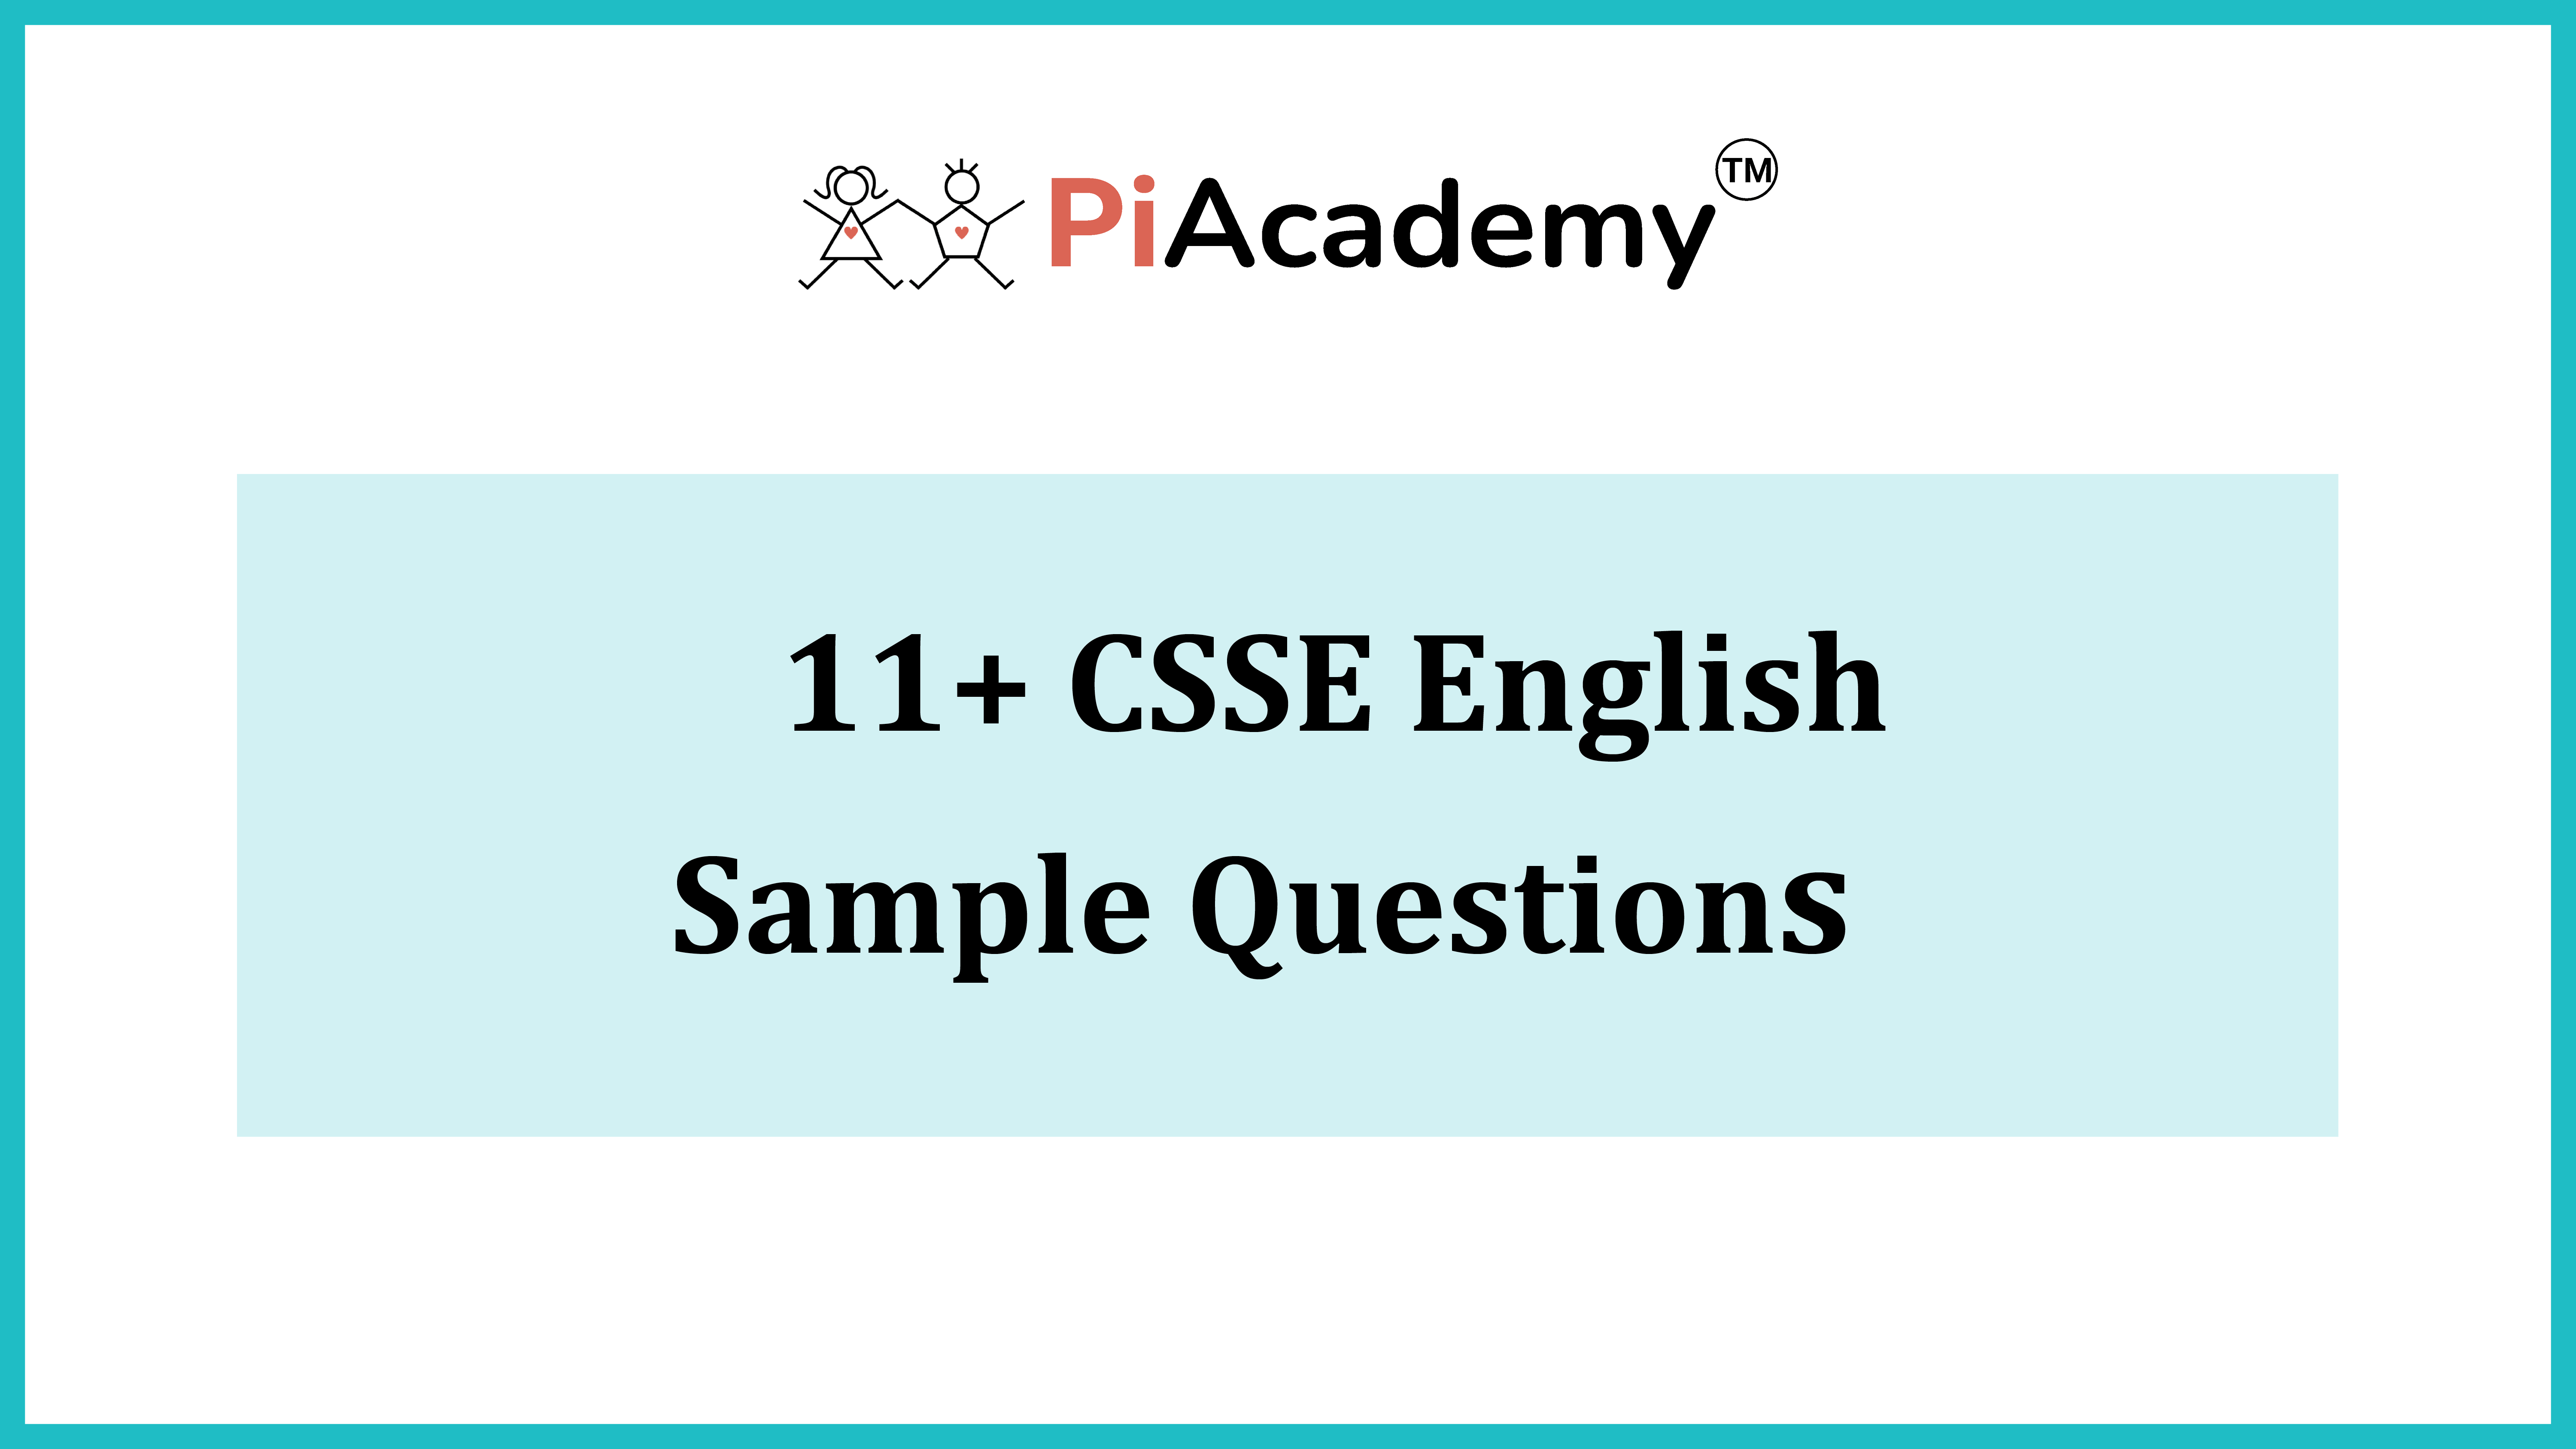 11-CSSE-Complete-Guide-Article-English-Title